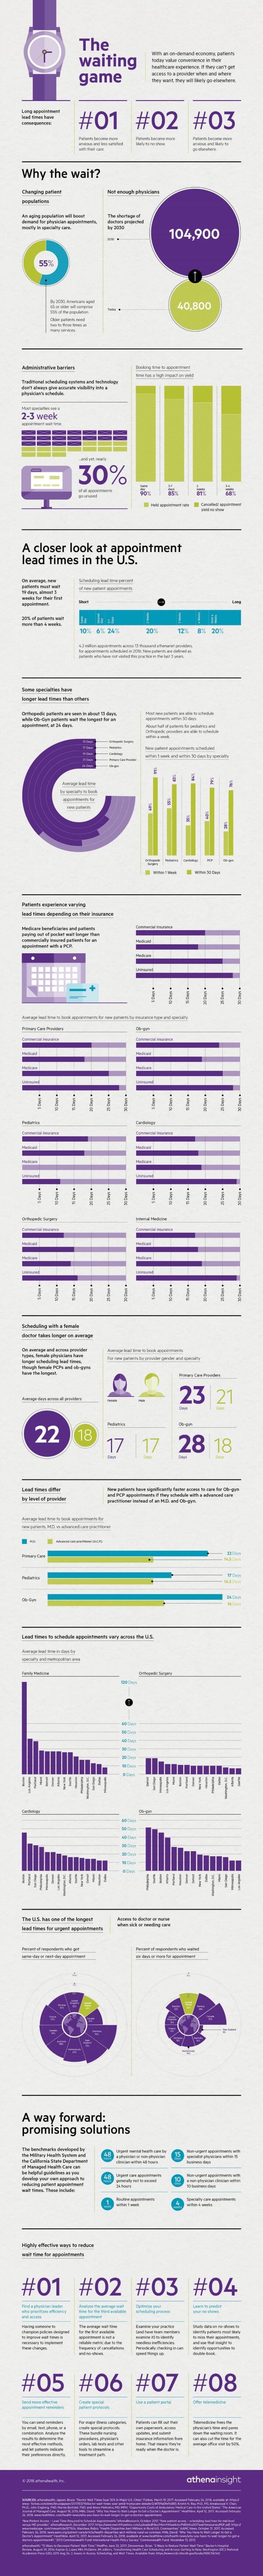 athenahealth infographic detailing information about medical patient wait times